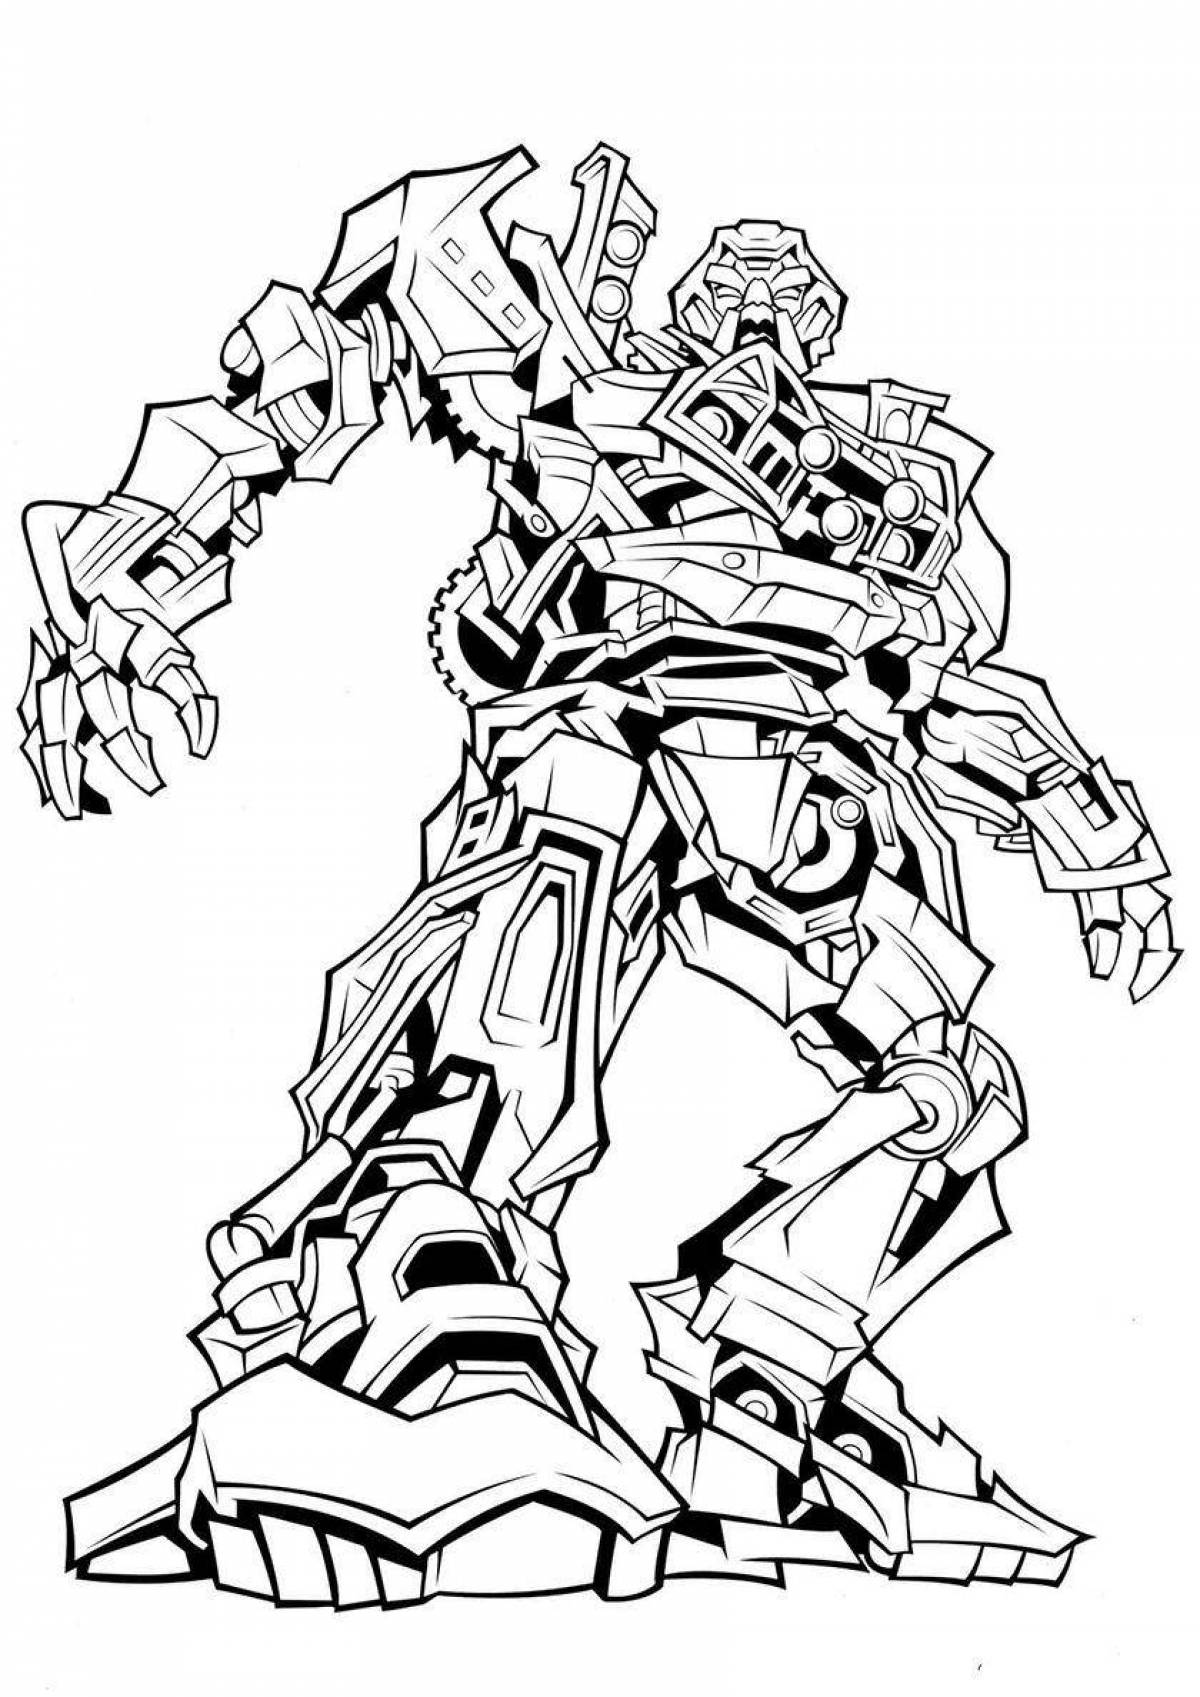 Fantastic autobot coloring page